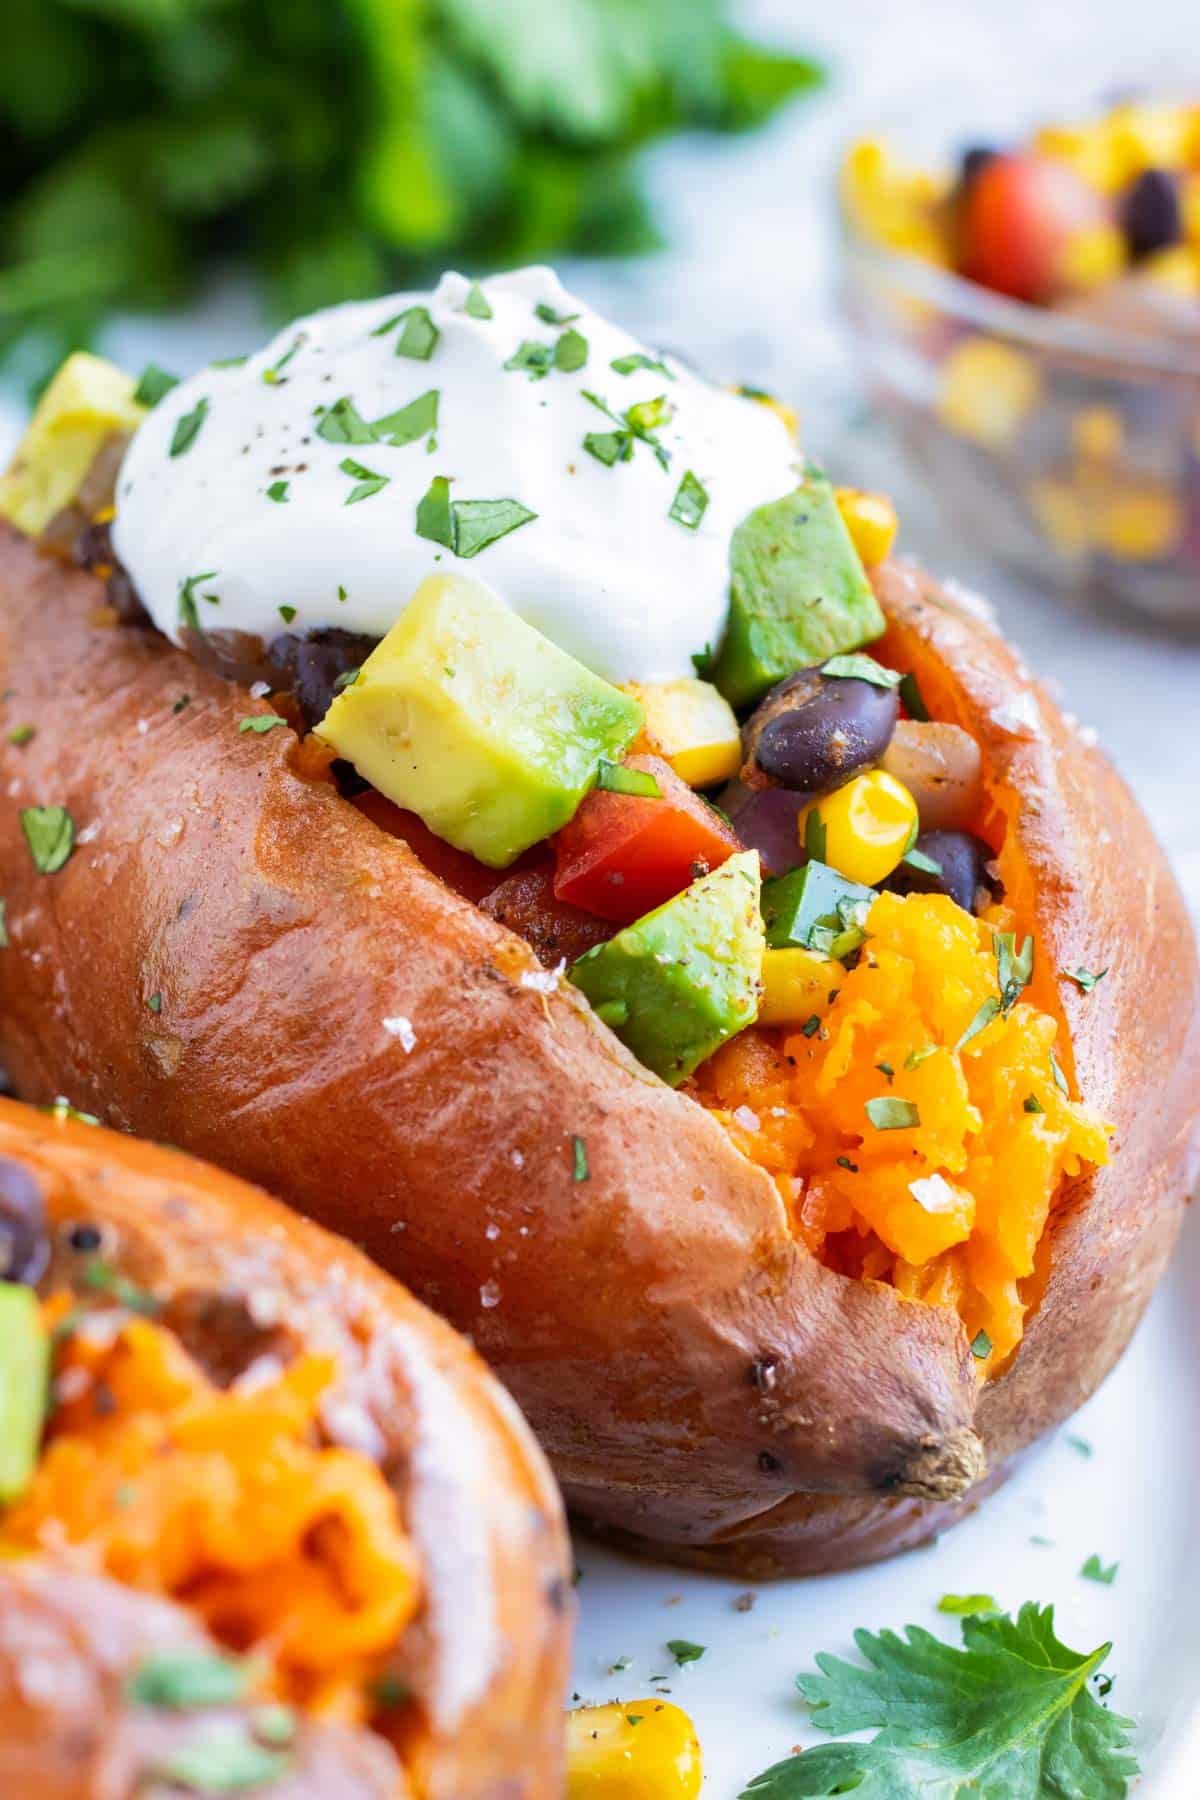 Mexican Stuffed Sweet Potatoes RECIPE served with sour cream and cilantro on top.